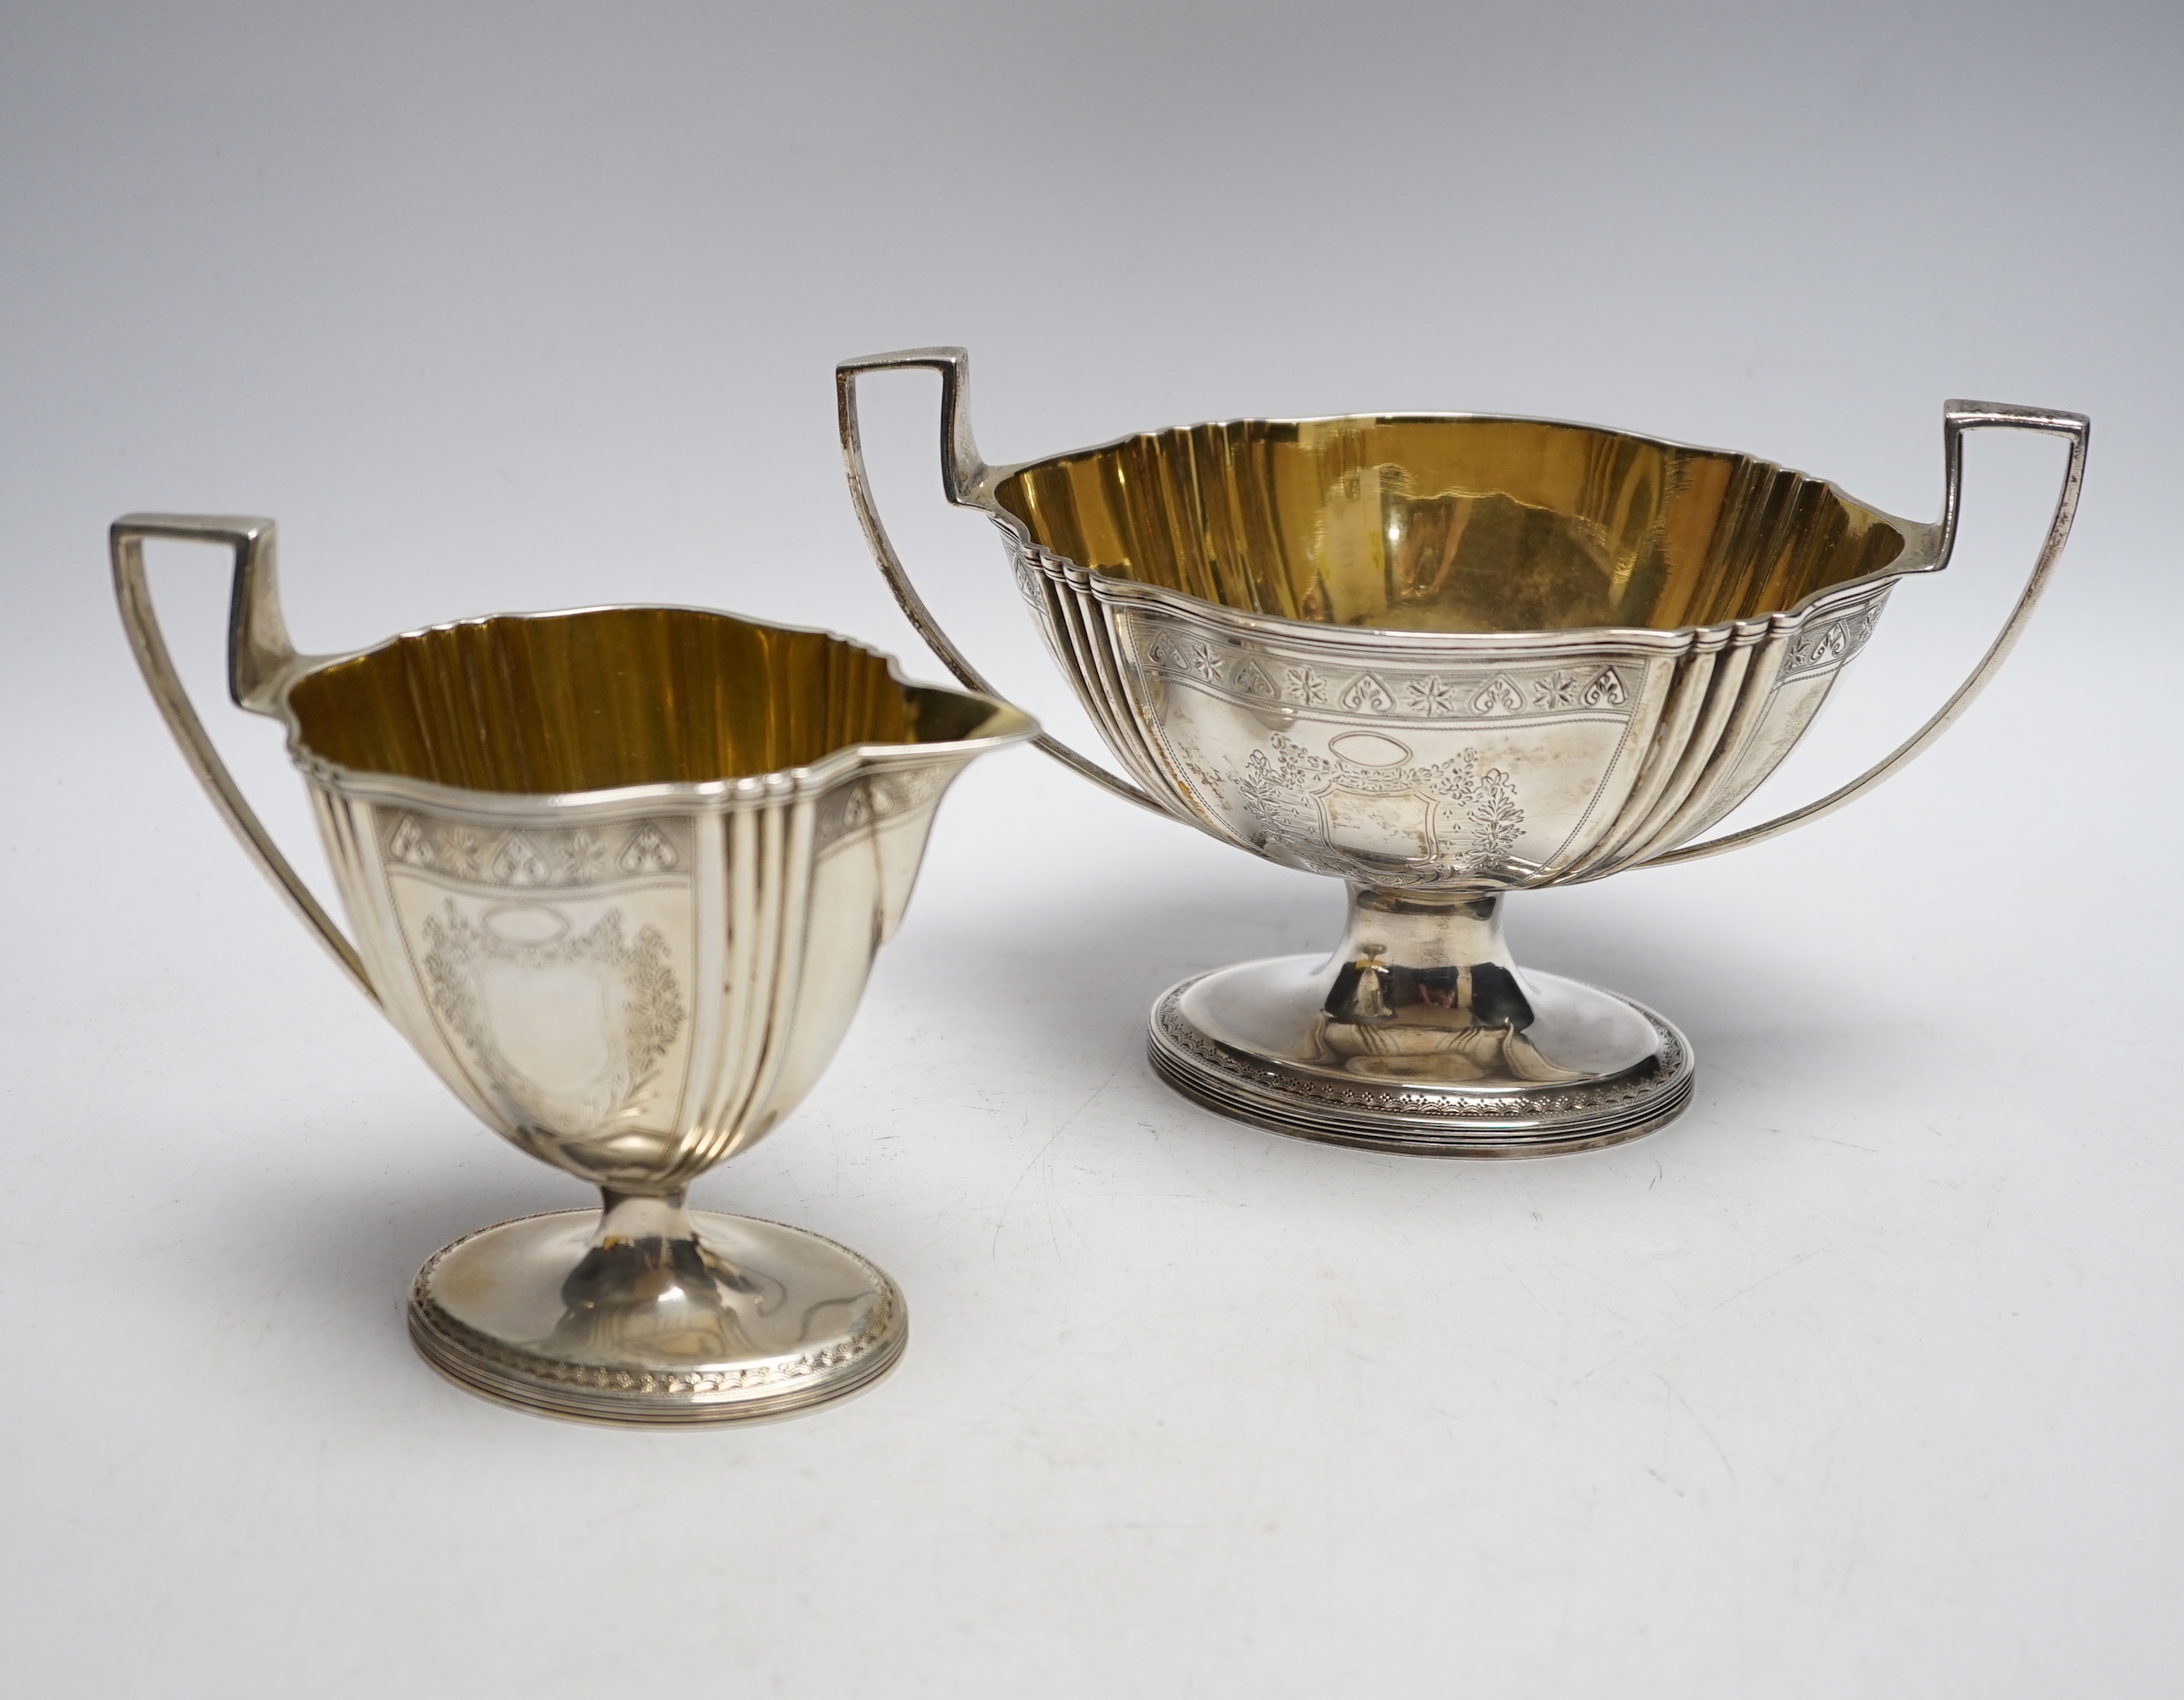 A George III engraved silver two handled oval pedestal sugar bowl and matching cream jug, Henry Chawner, London, 1792, bowl 21.2cm over handles, 20.1oz.